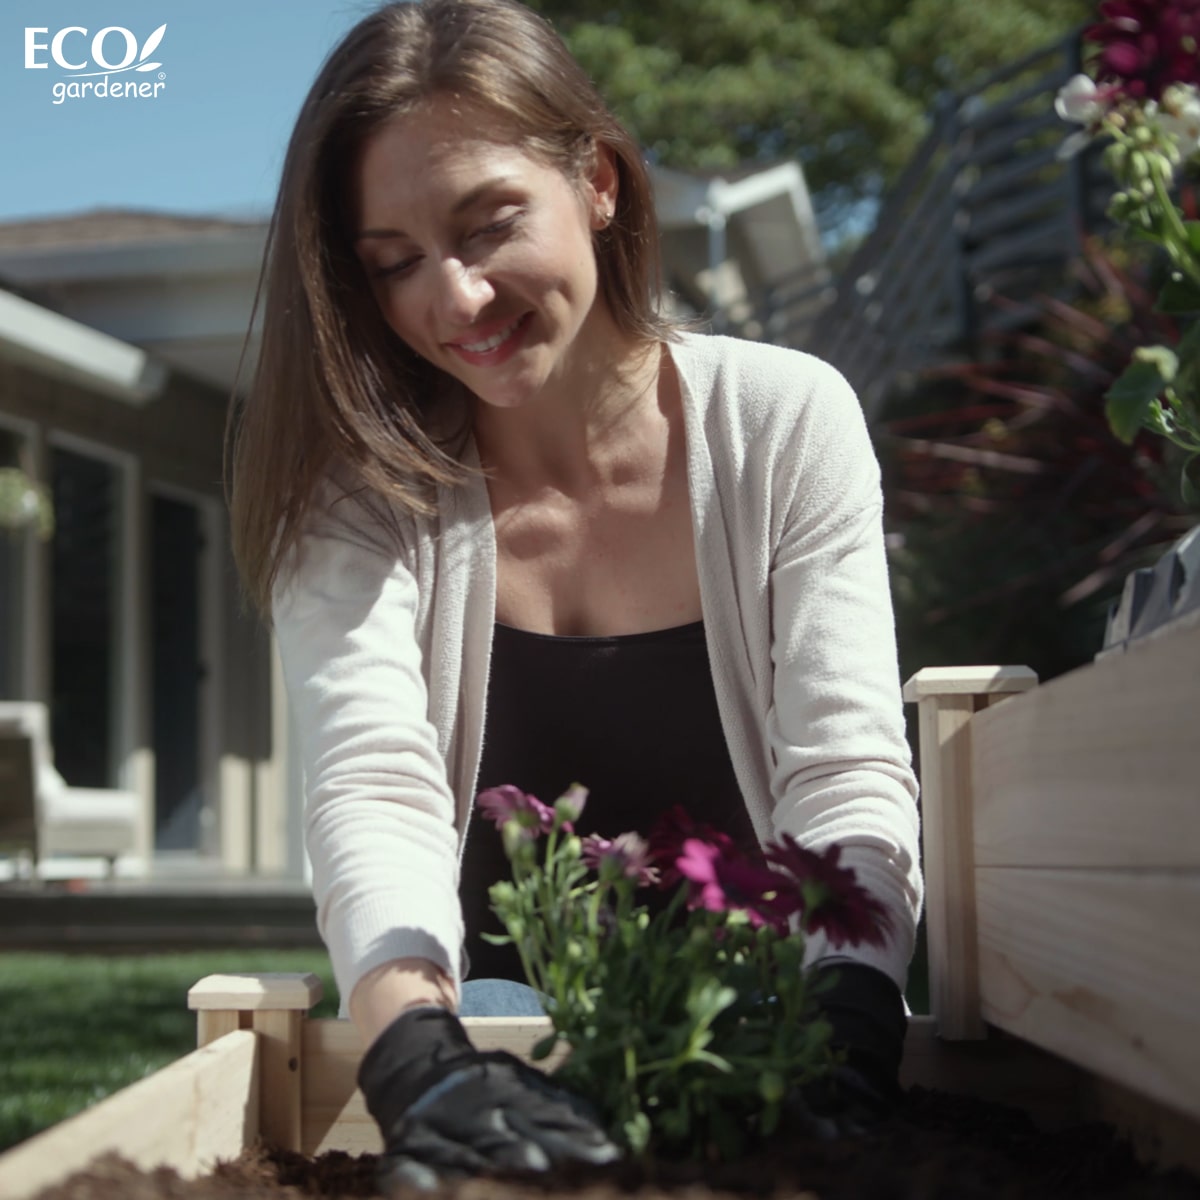 A woman planting on Ecogardener Tiered Raised Bed